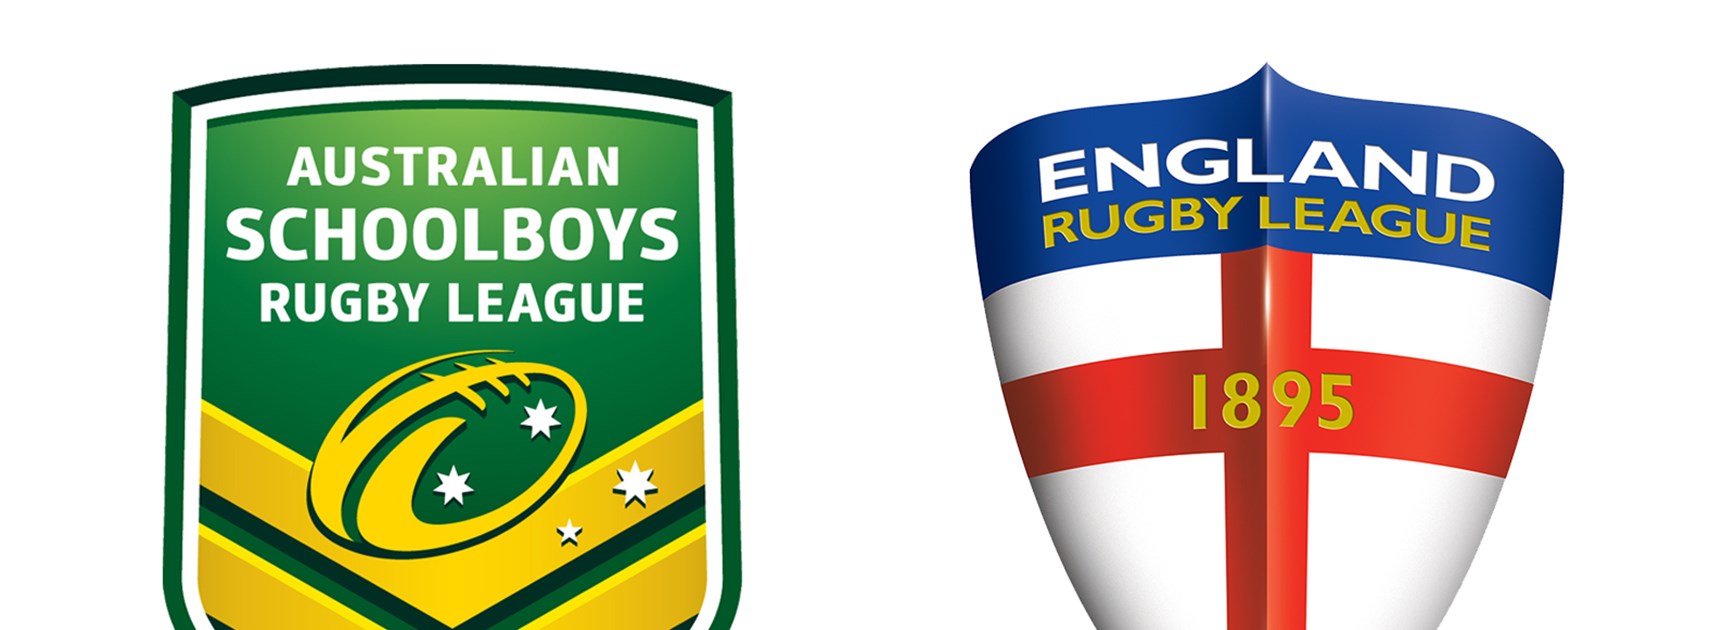 The Australian Schoolboys will play two Tests against the England Academy.